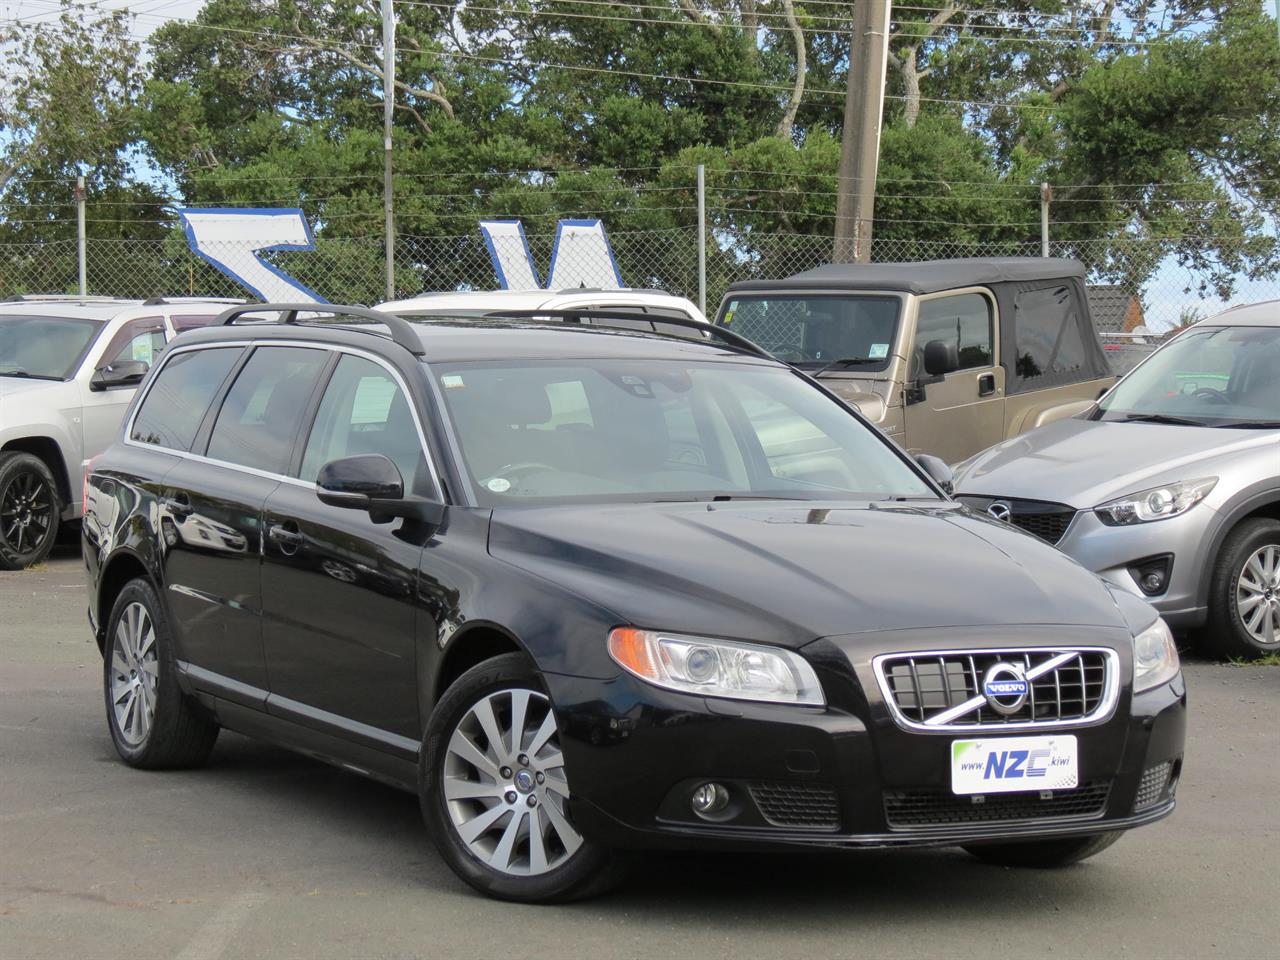 NZC 2012 Volvo V70 just arrived to Auckland